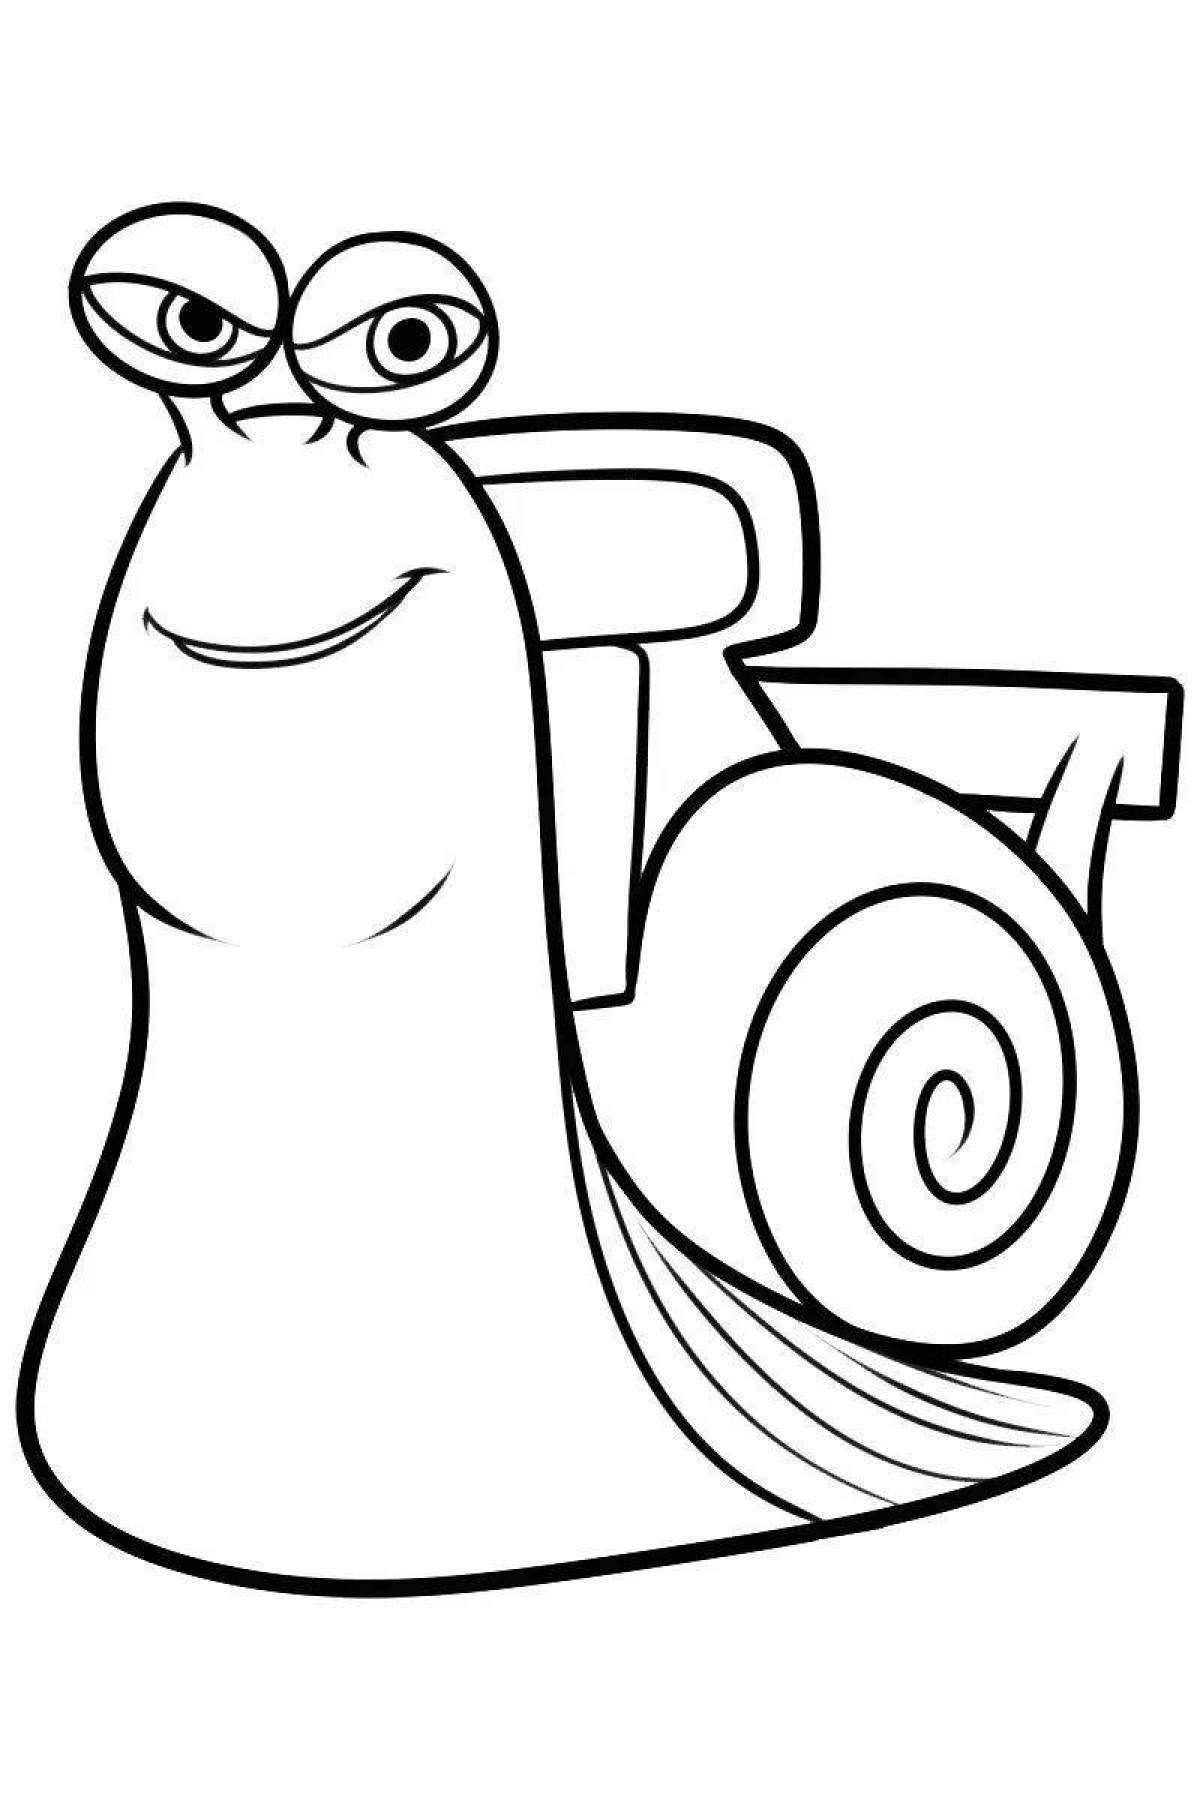 Charming turbo snail coloring page